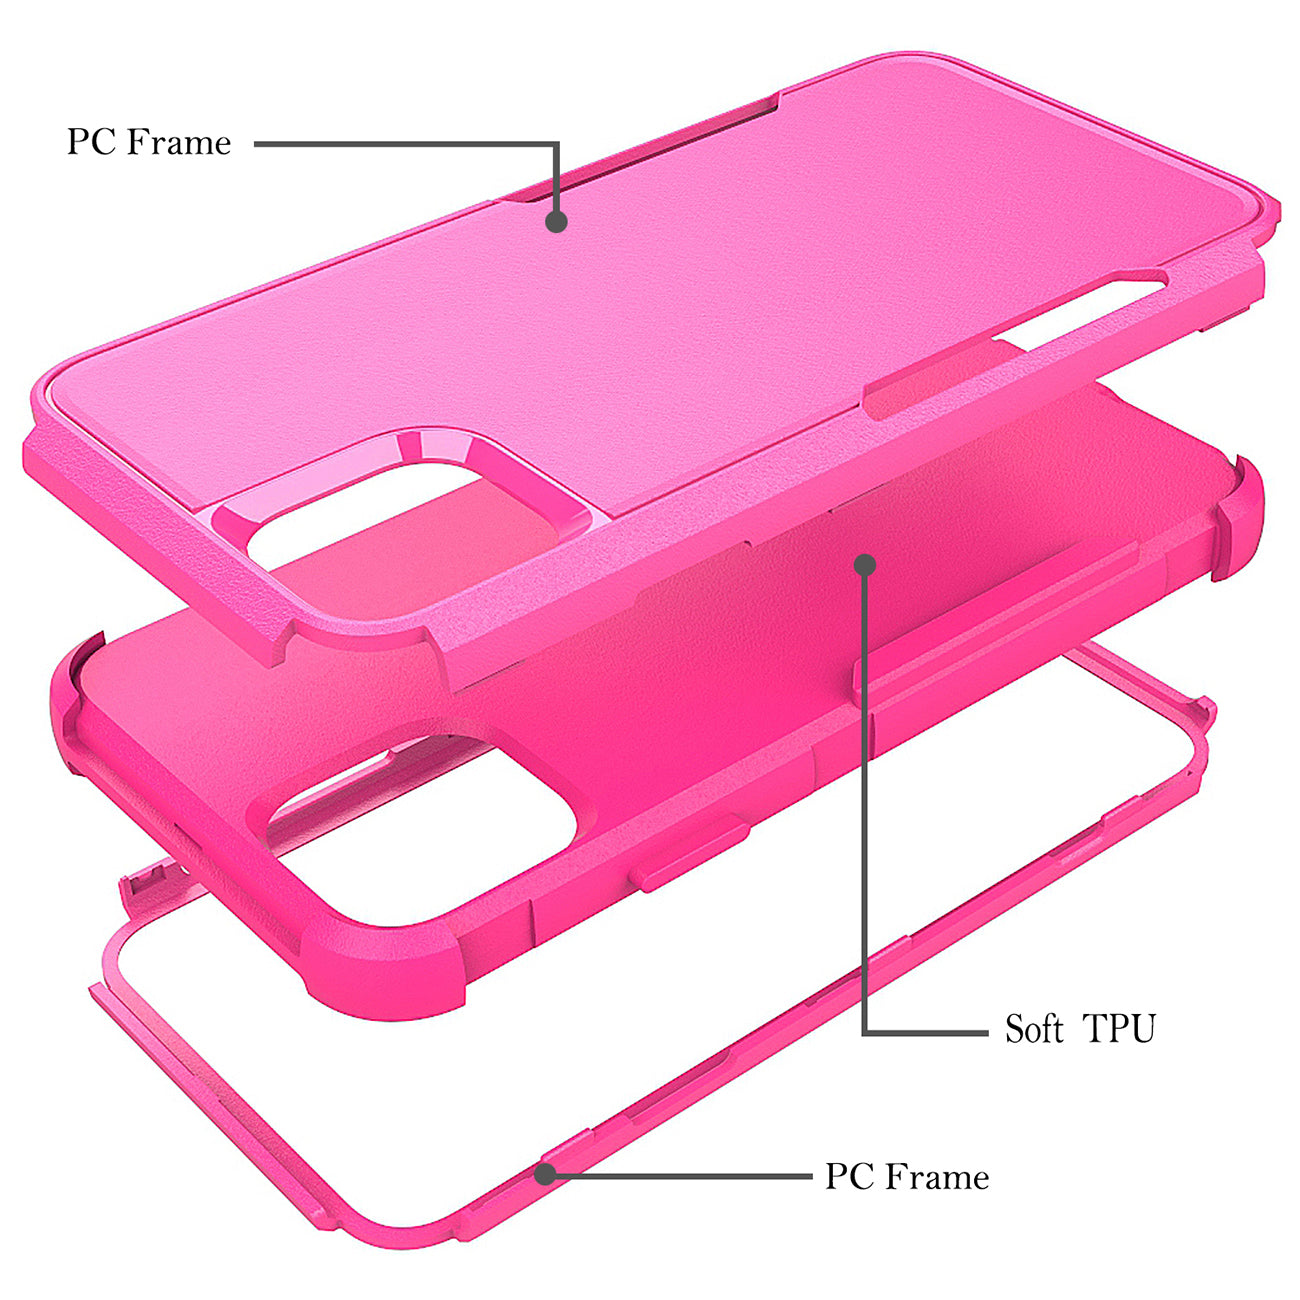 Case Hybrid Heavy Duty Defender Rugged Armor 3 in 1 Apple iPhone 11 Pro Max Hot Pink Color